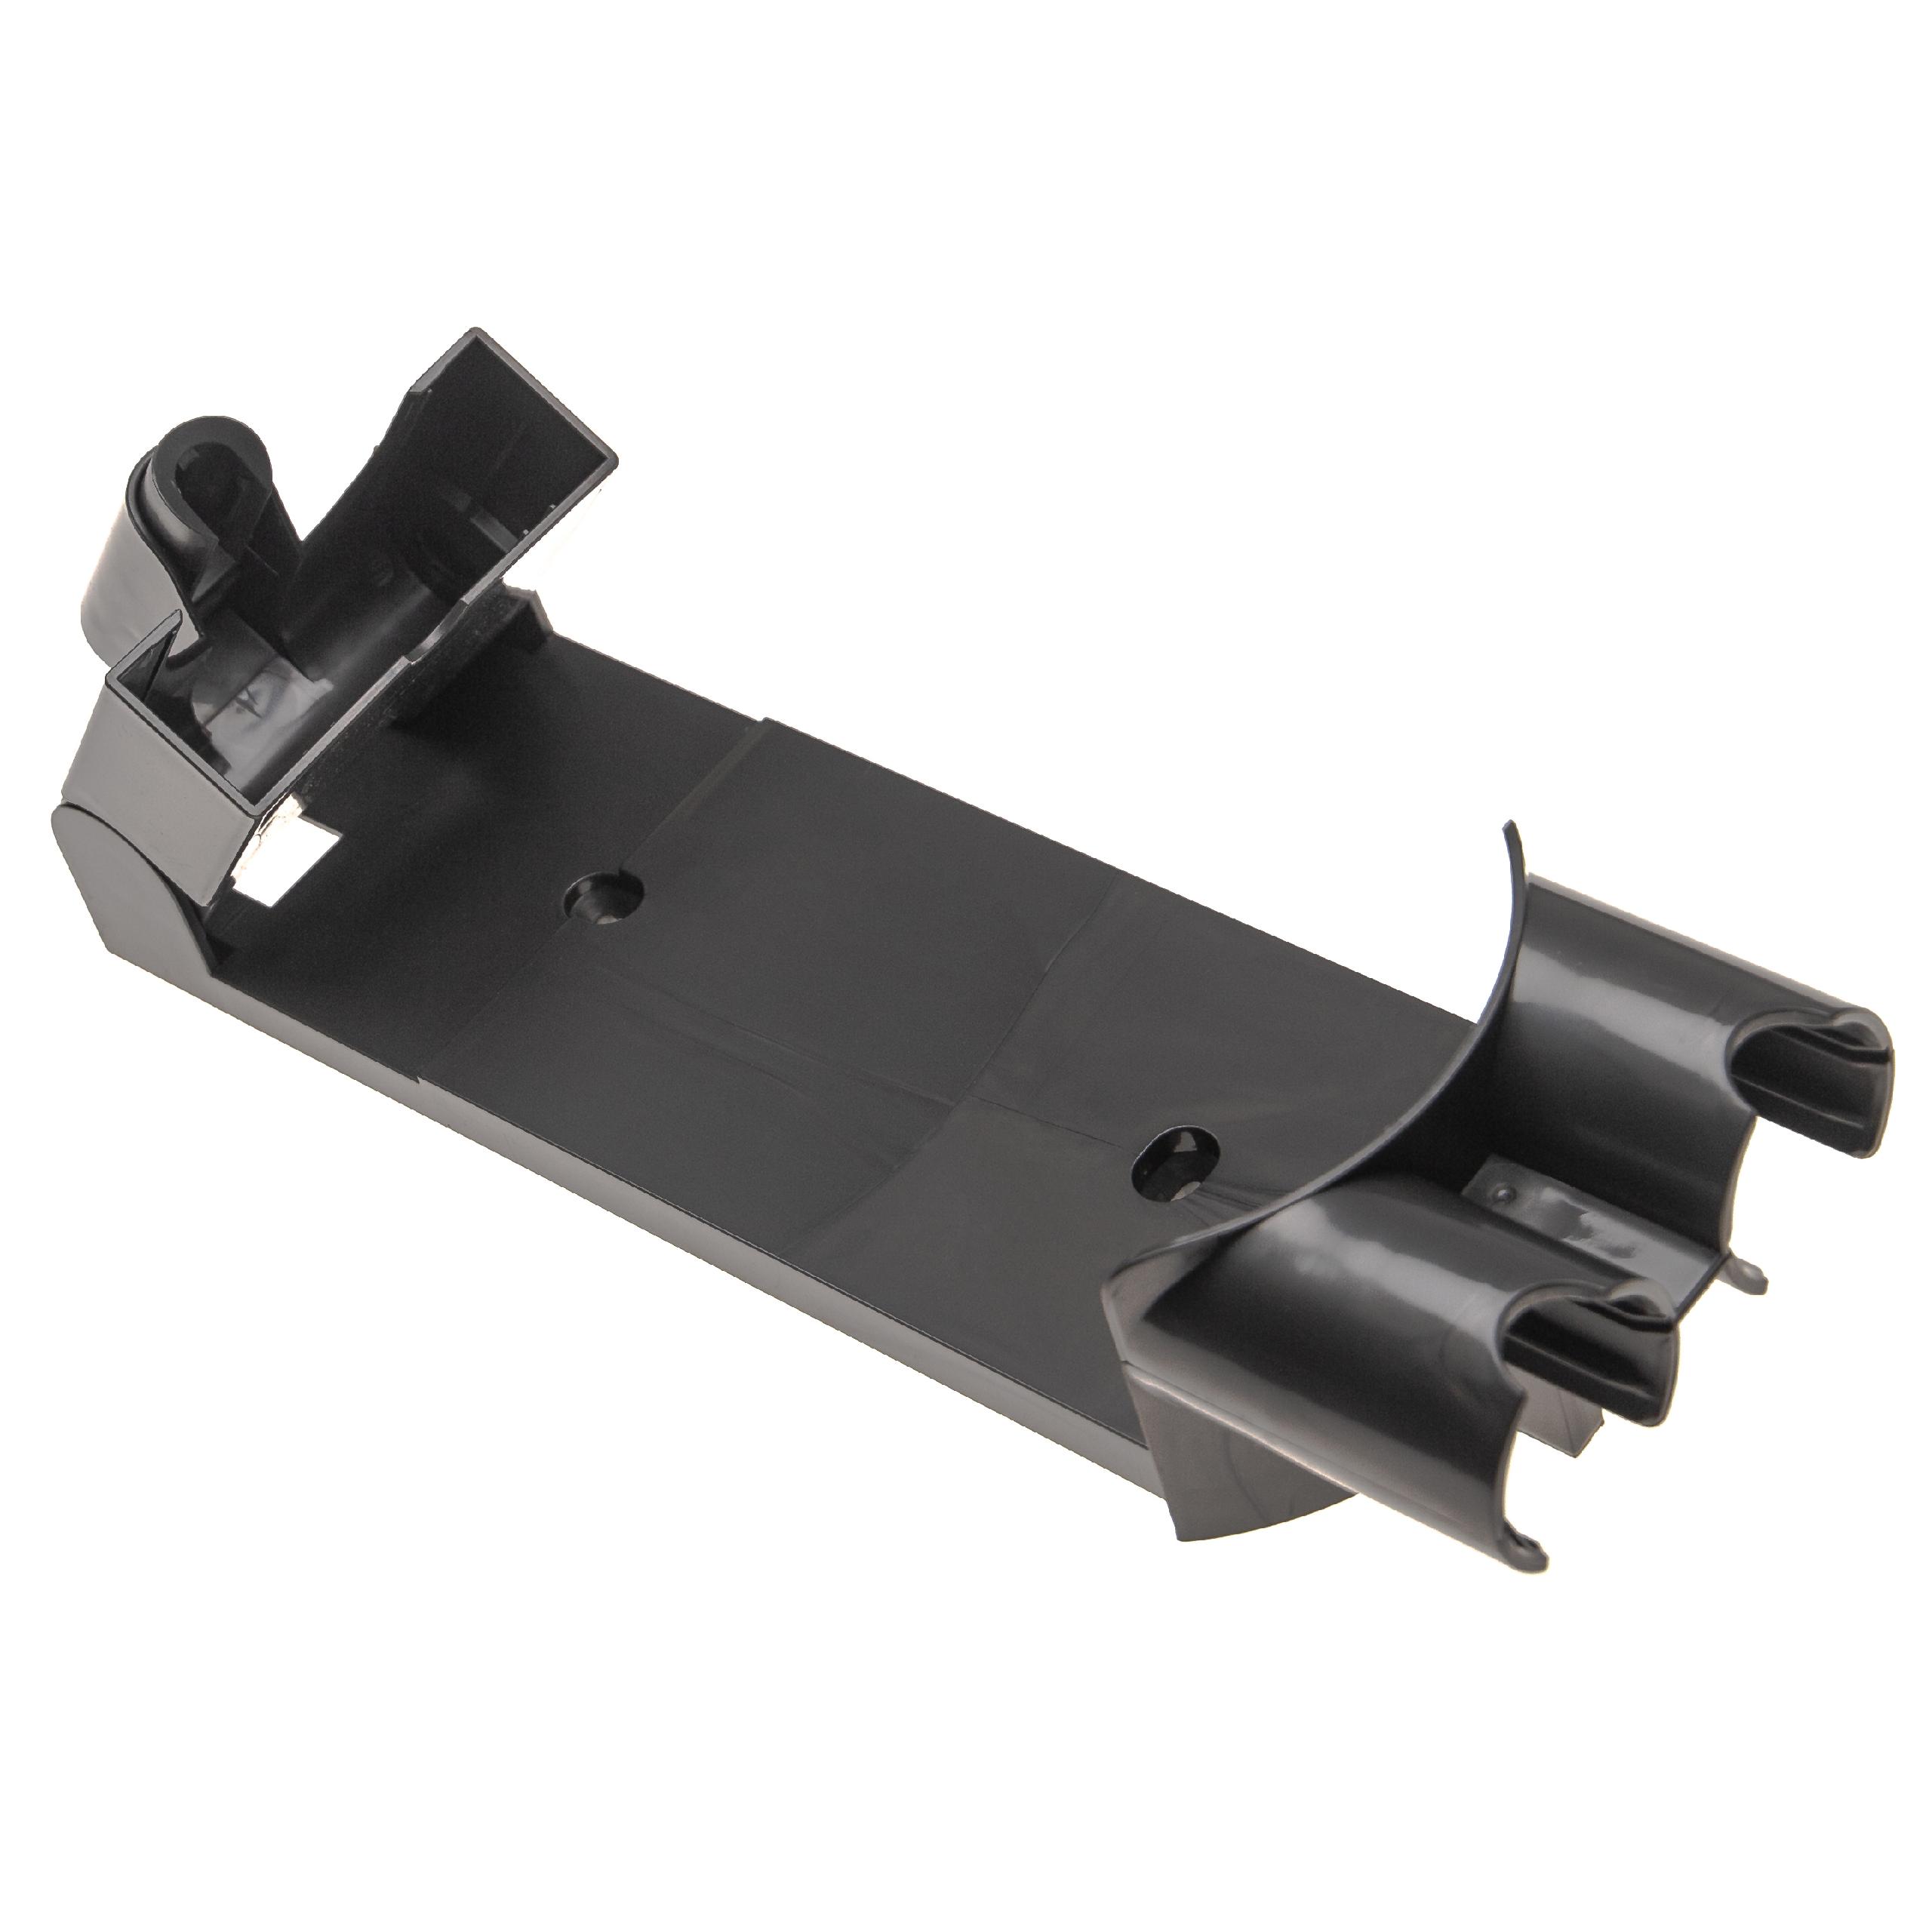  holder, wall mount- universal for vacuum cleaner